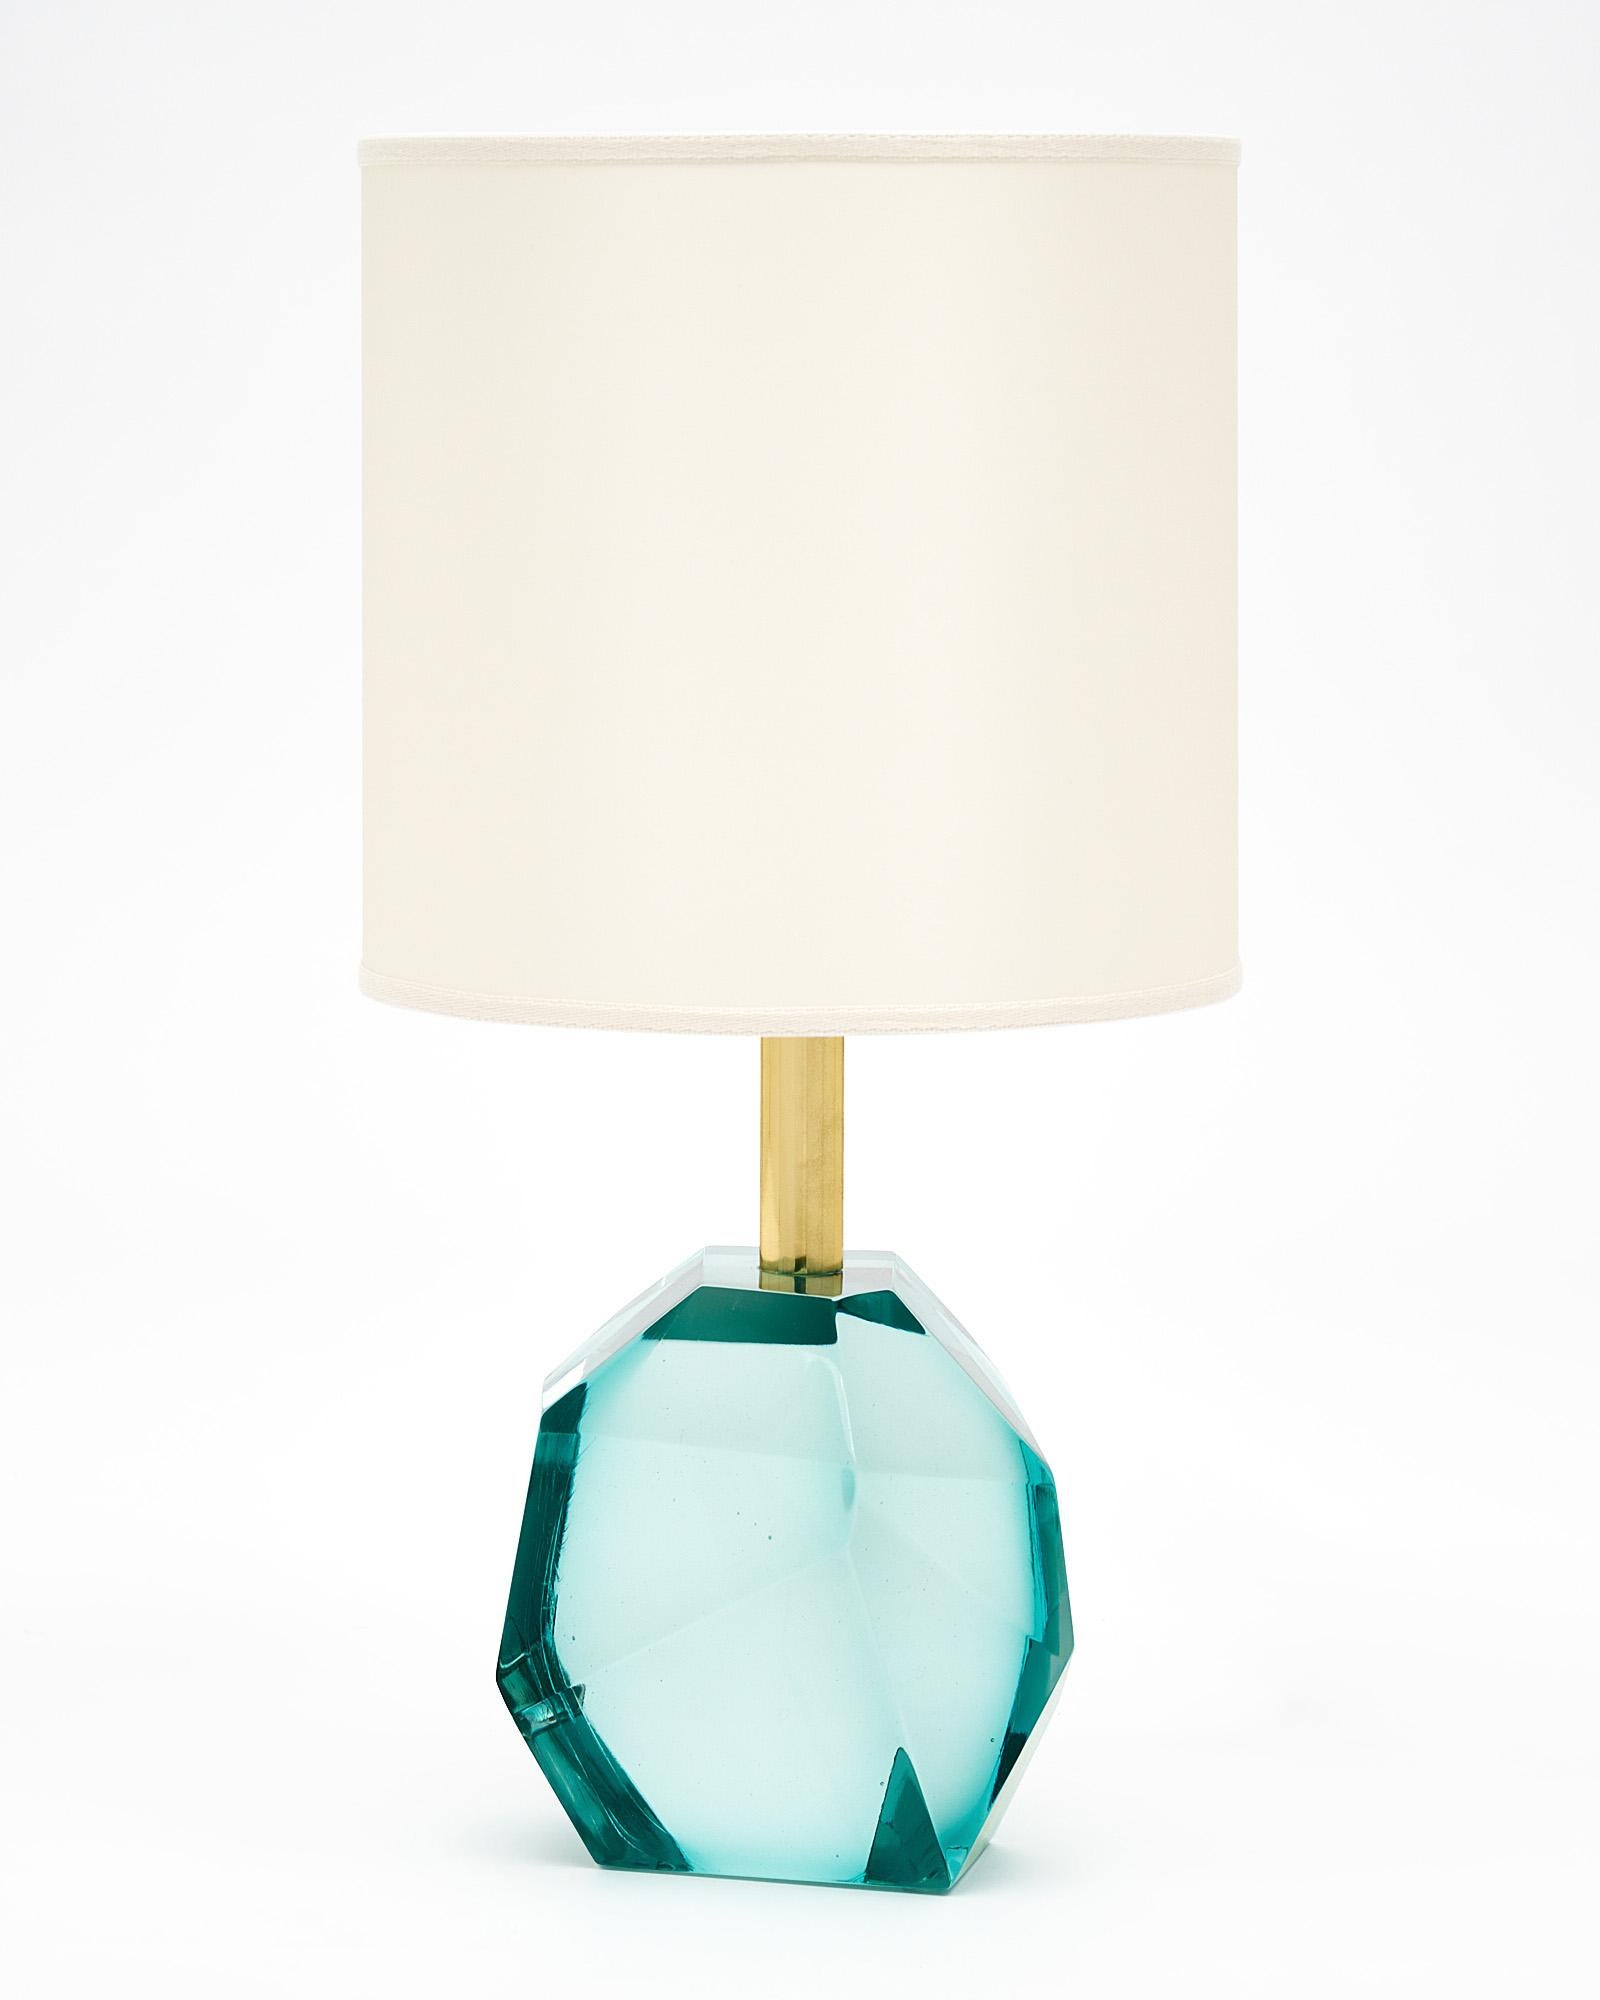 Murano glass aquamarine rock lamps signed by Alberto Dona. We love the modernity of the lamps, the abstract form, and the high decorative impact of this dynamic pair. They have been newly wired to fit US standards.